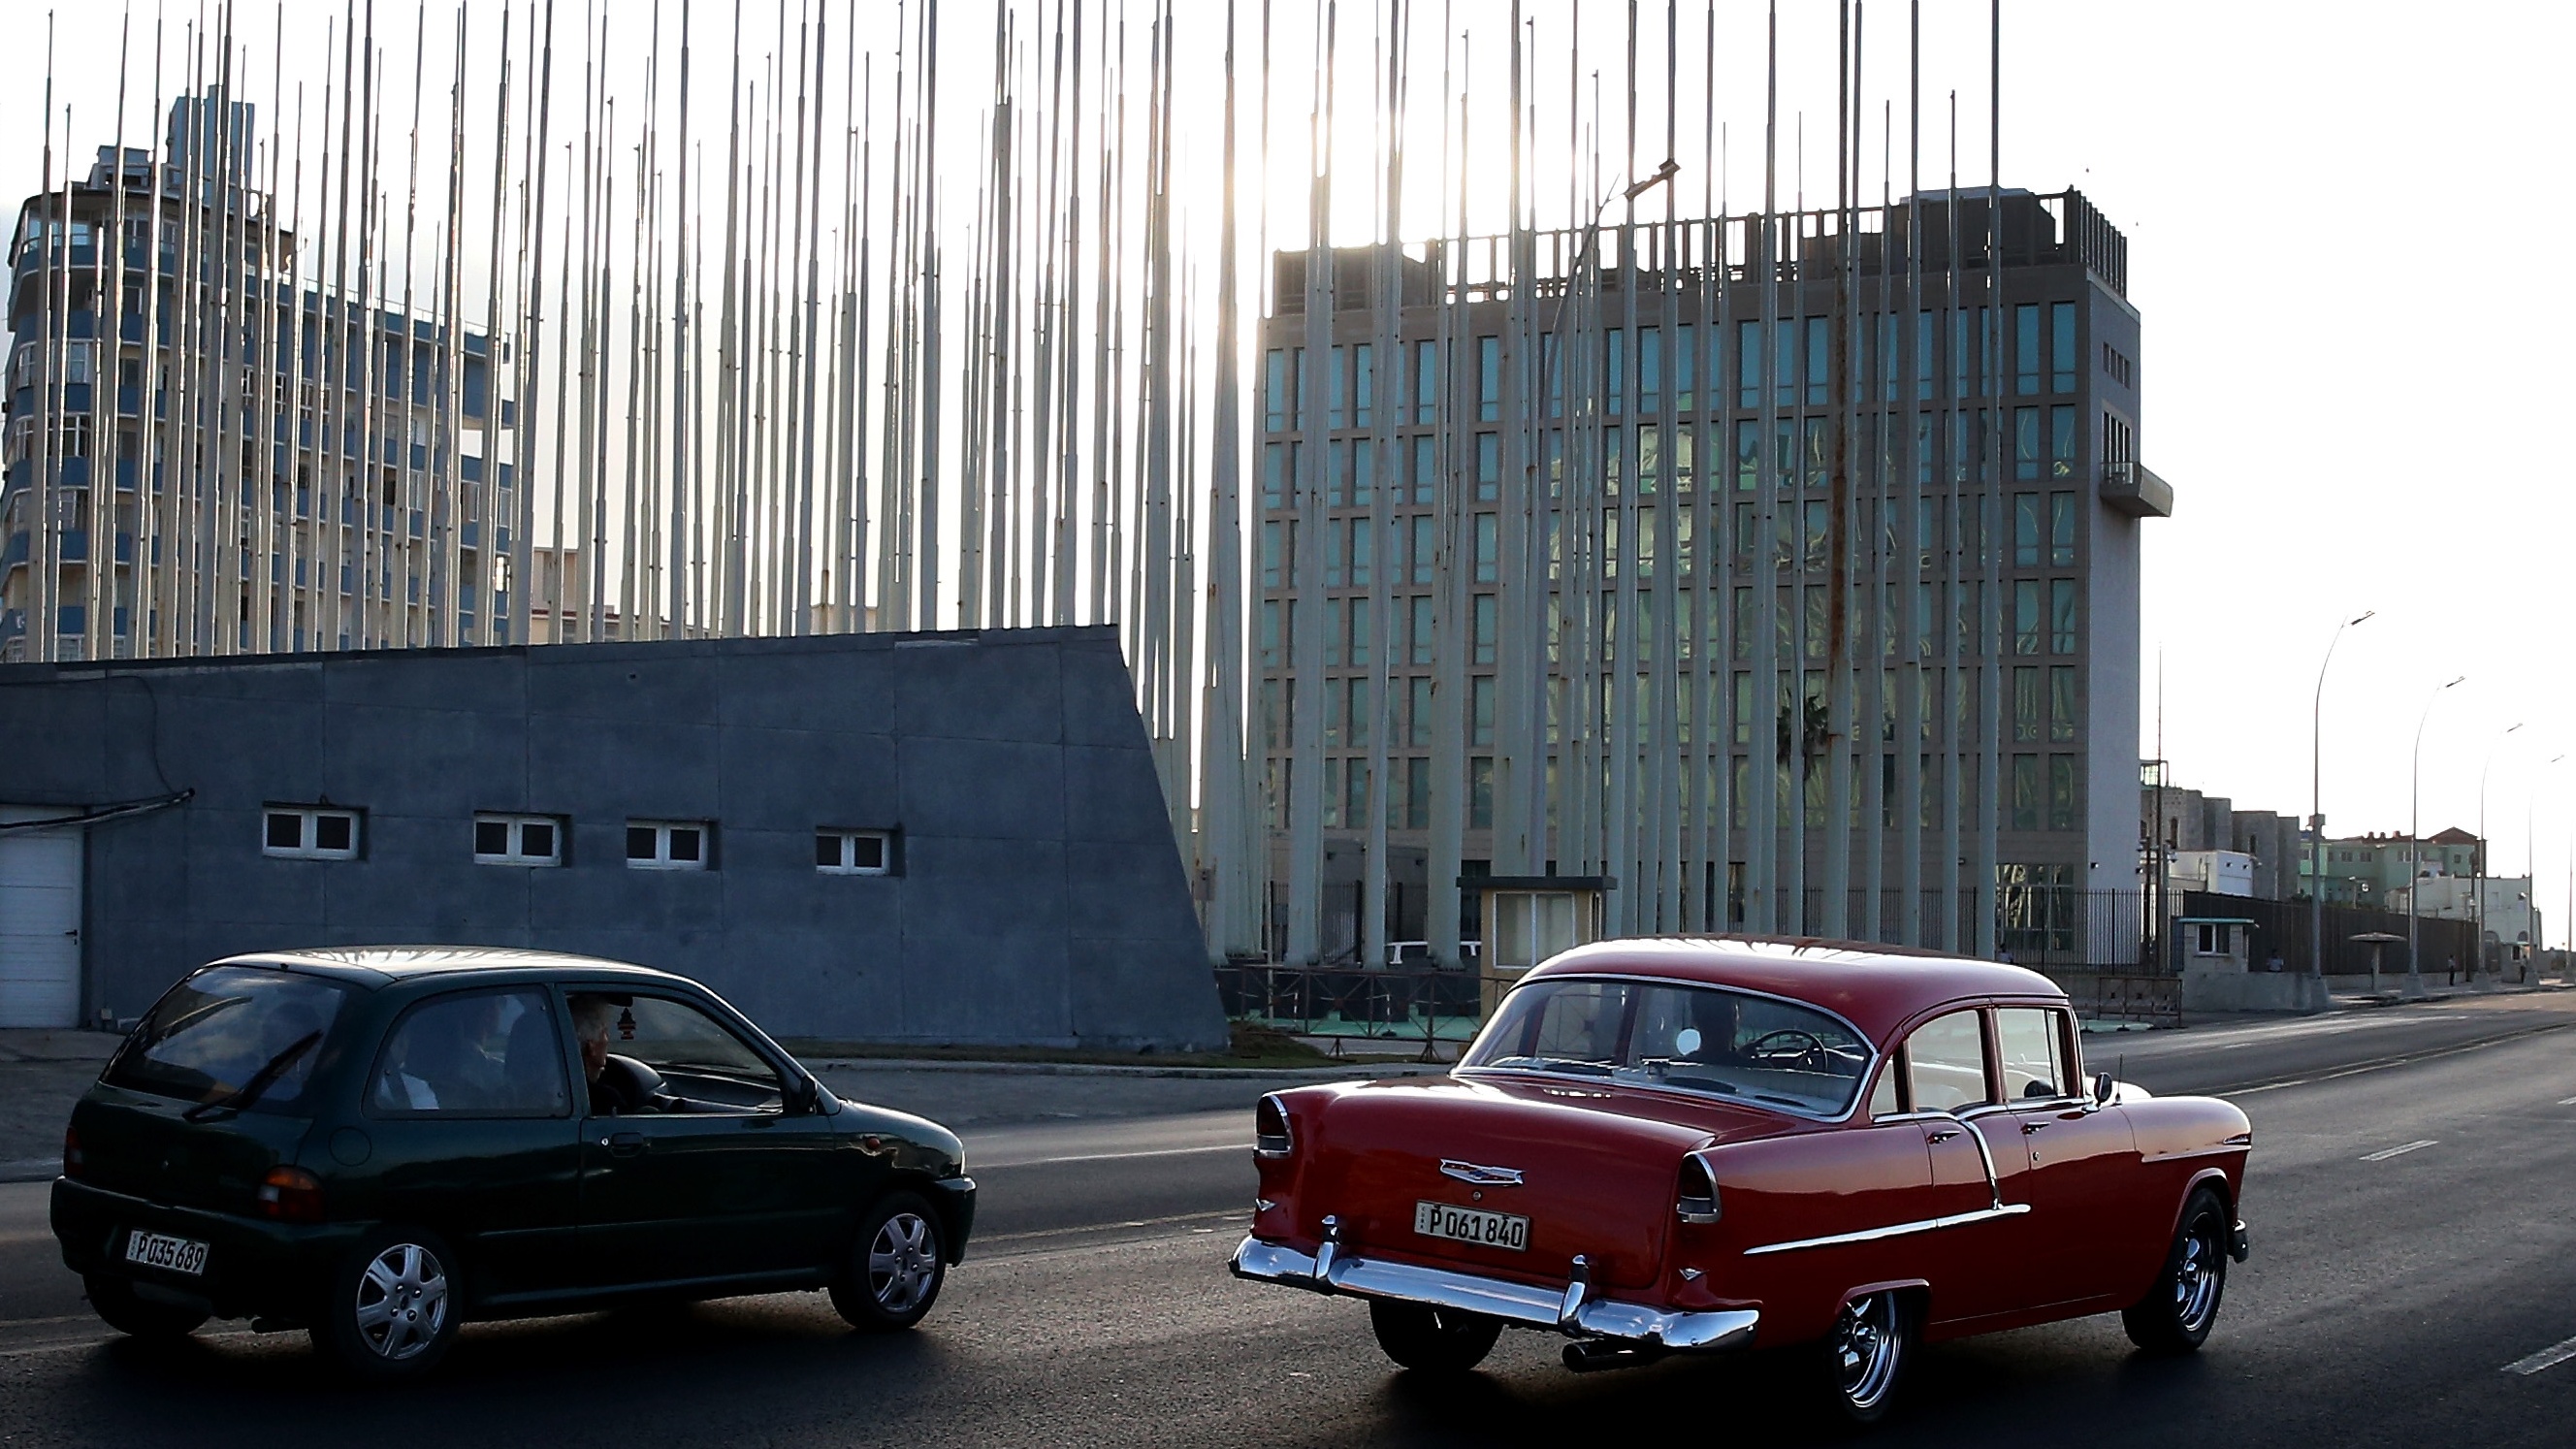 The US embassy in Havana, Cuba where the brain injuries were first reported